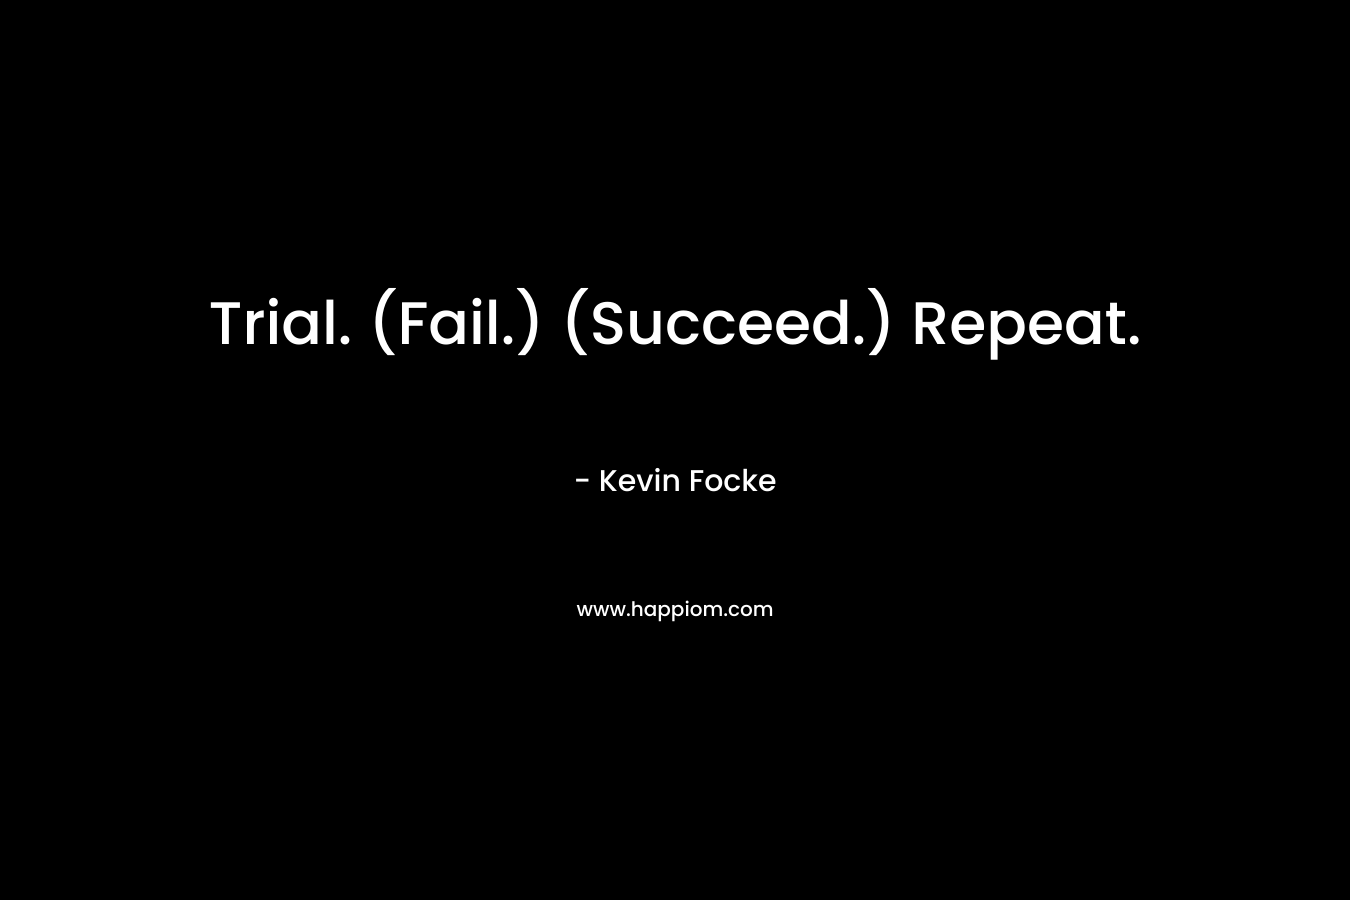 Trial. (Fail.) (Succeed.) Repeat.